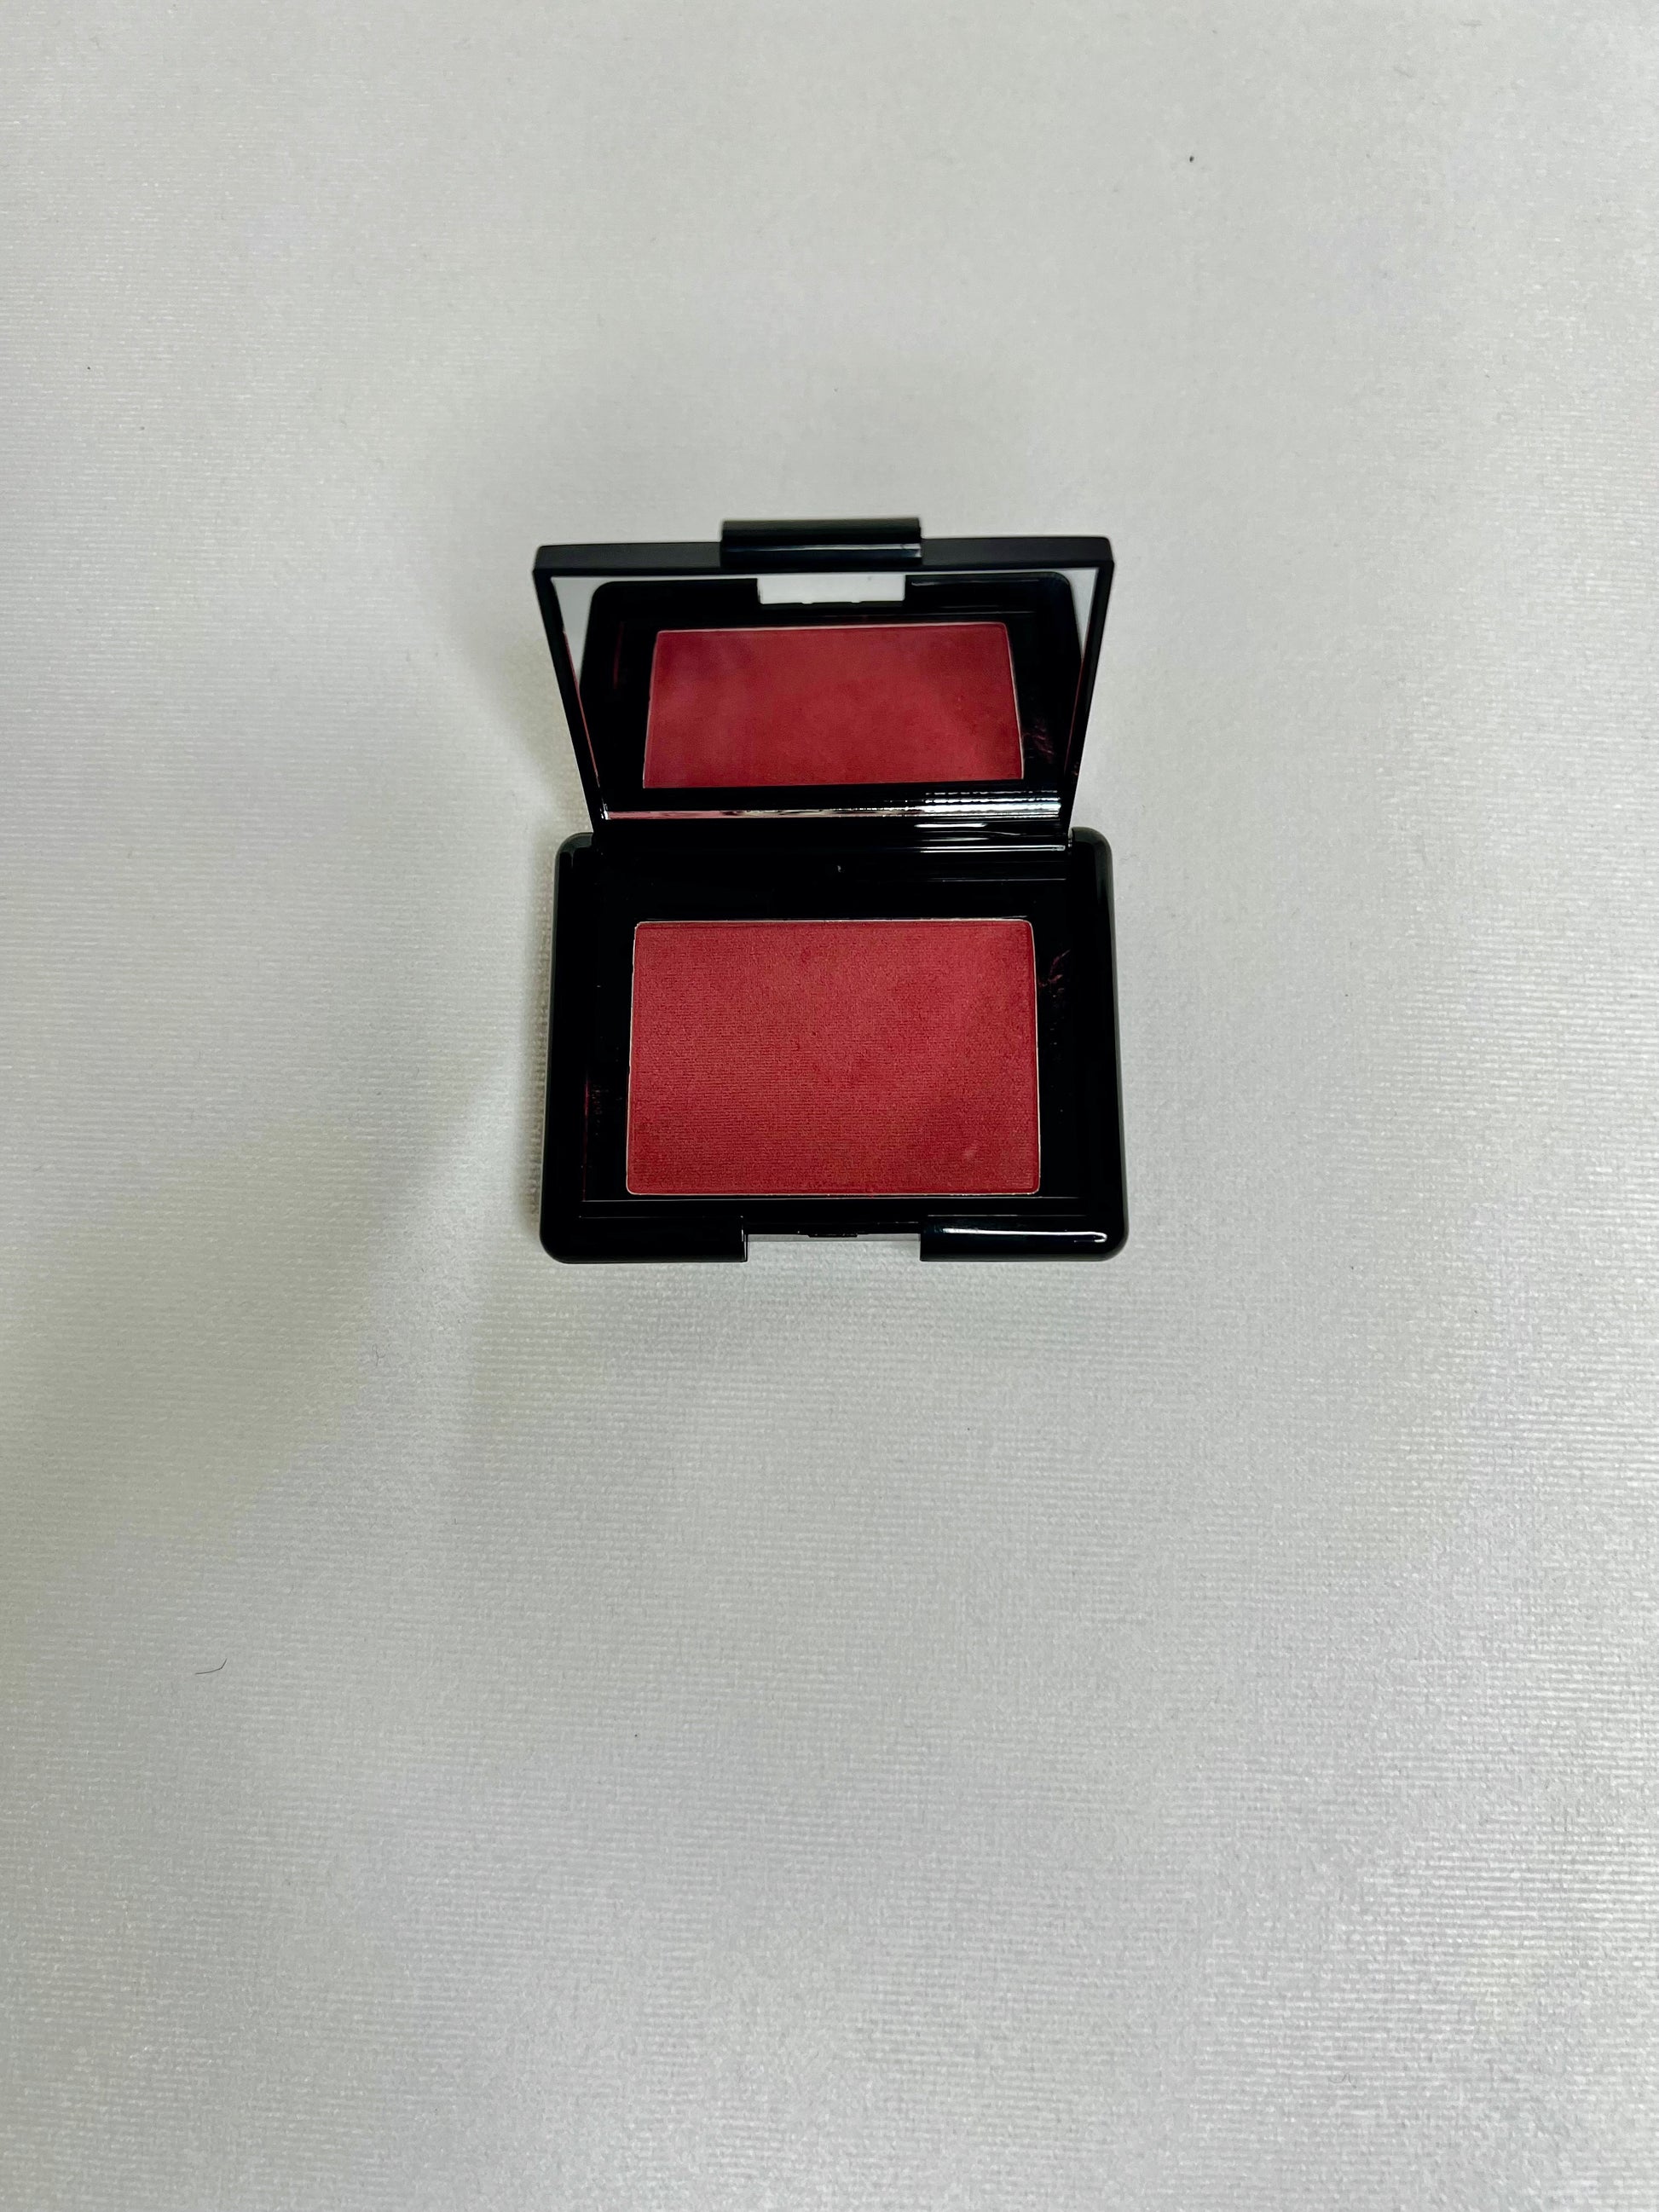 Paraben Free / EU Compliant / Gluten Free and Vegan/ Cruelty Free     Rectangle: Net Wt. 5 g / .17 oz.  This rich, intense color blush can be used to shade, brighten, enhance, and define the shape of your face. The formula glides on soft resulting in a picture perfect finish.